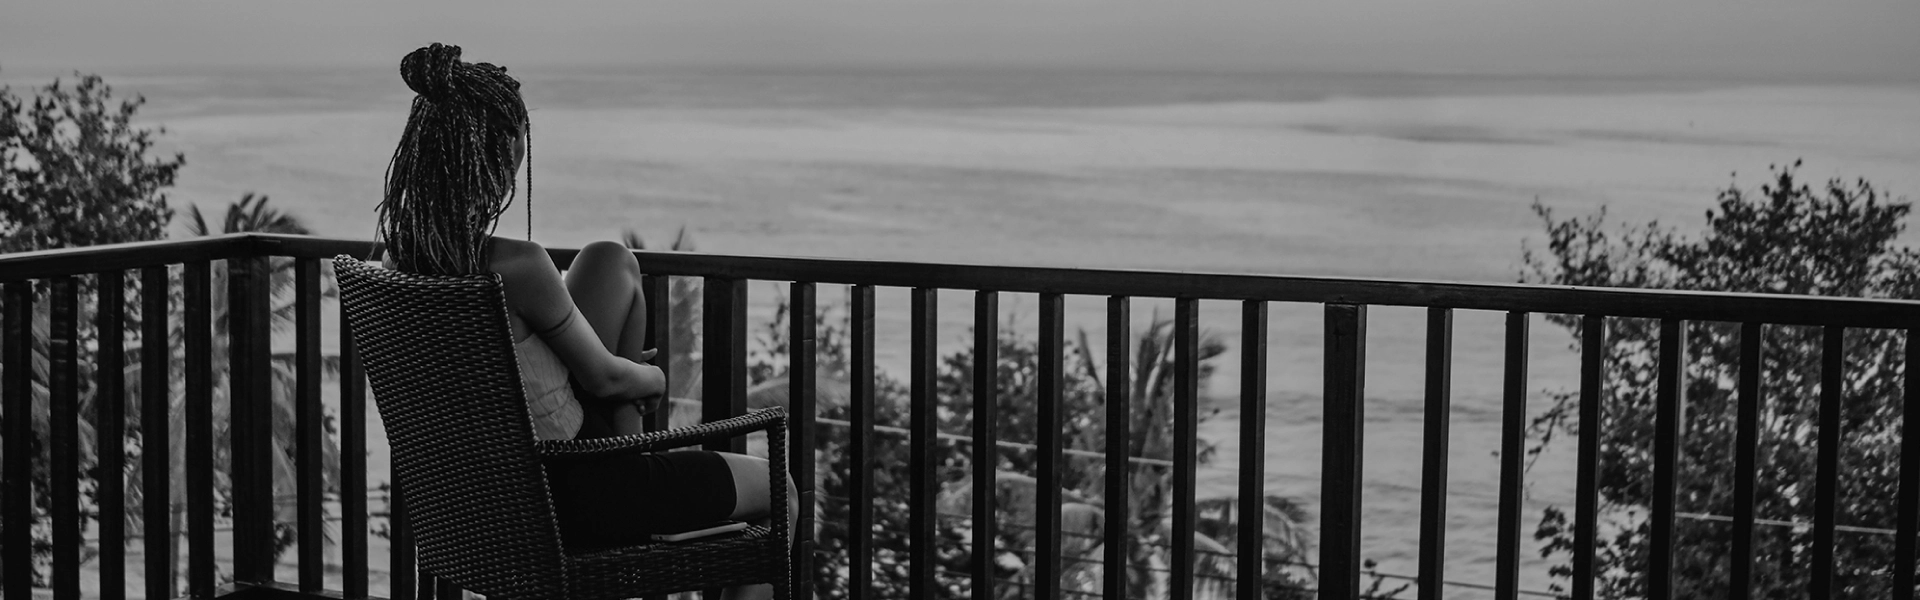 woman sitting in her chair looking out to sea from a balcony